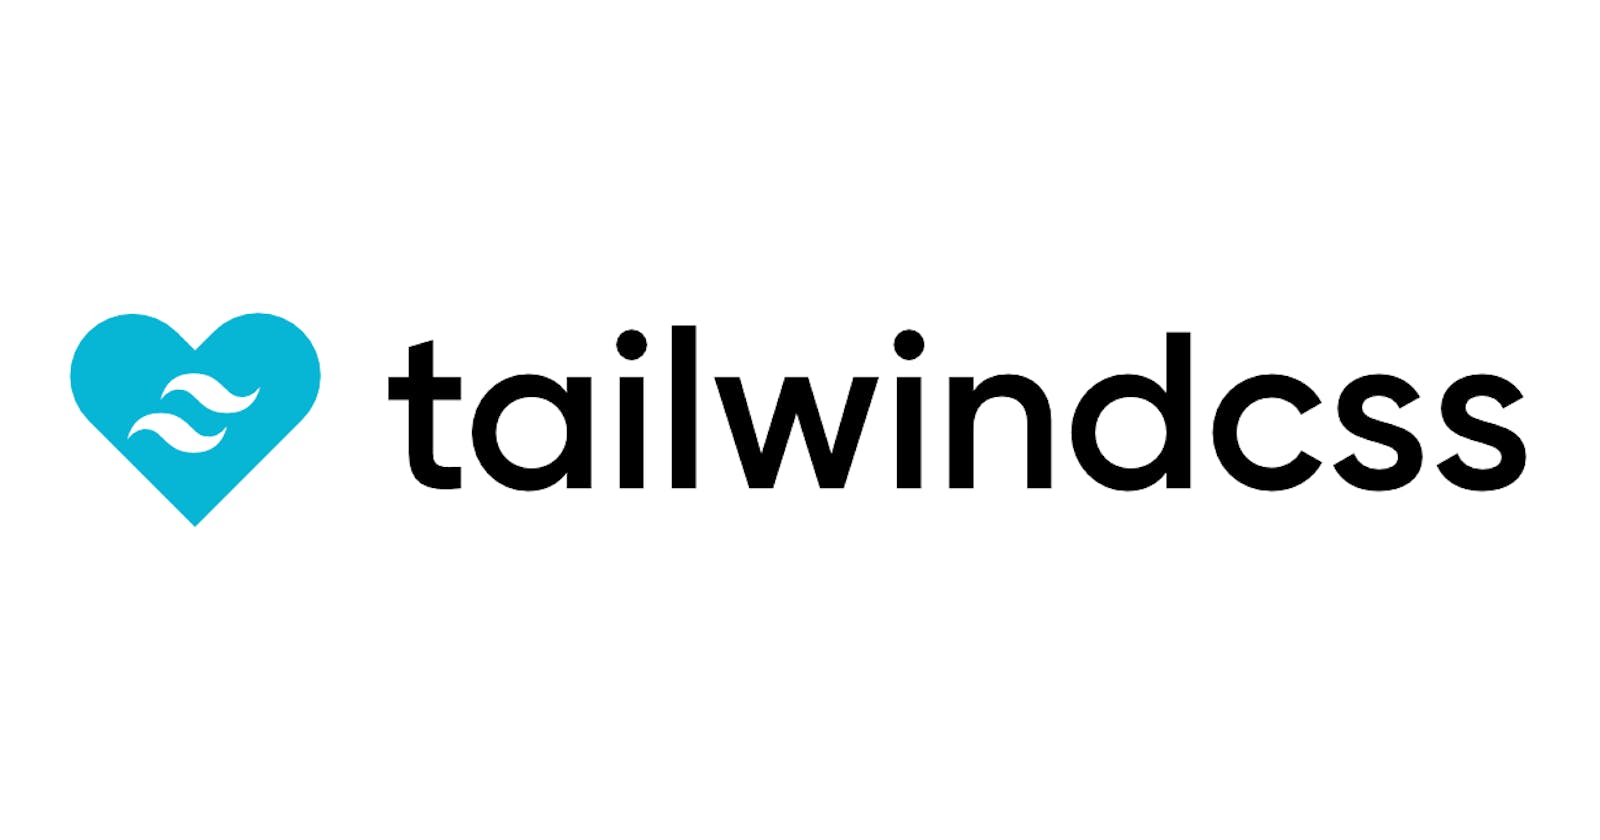 Some More about Tailwind